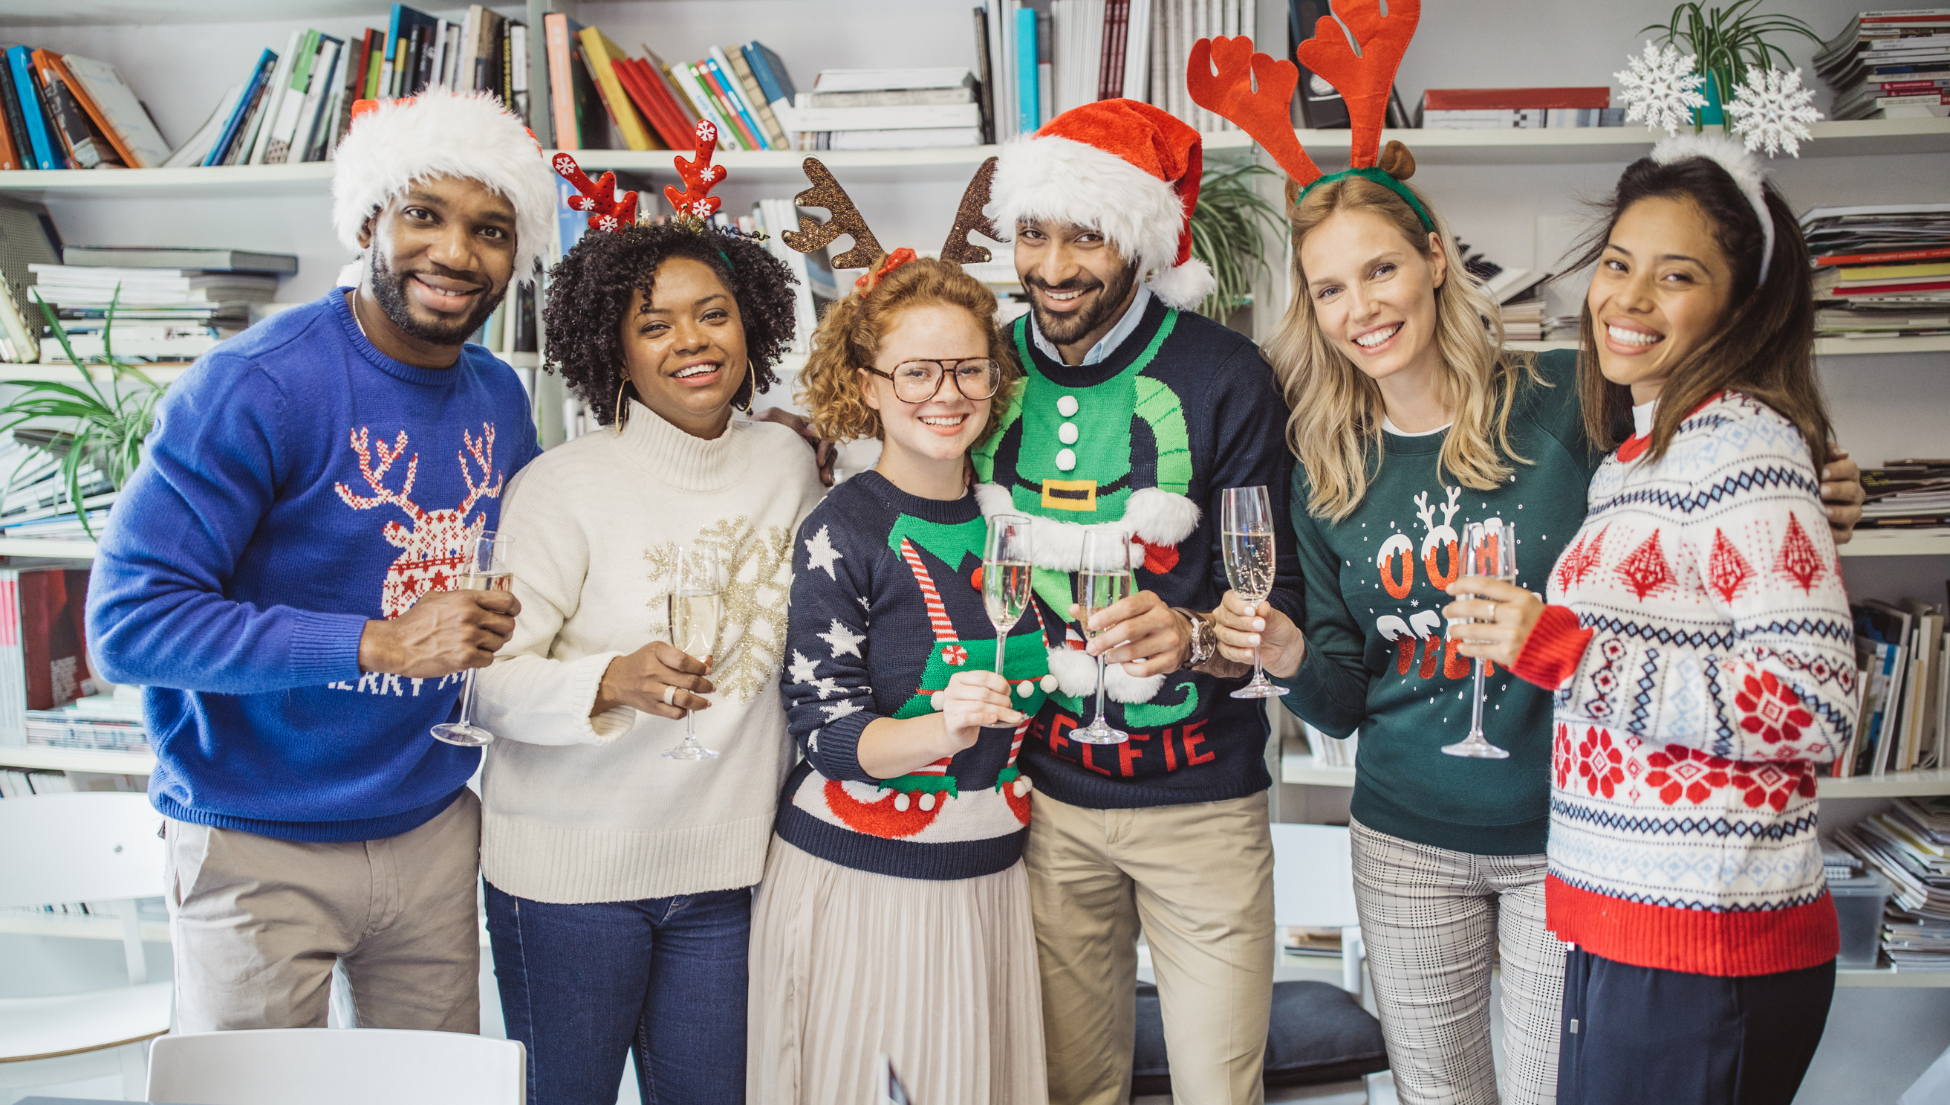 Four things every employee wants this Christmas